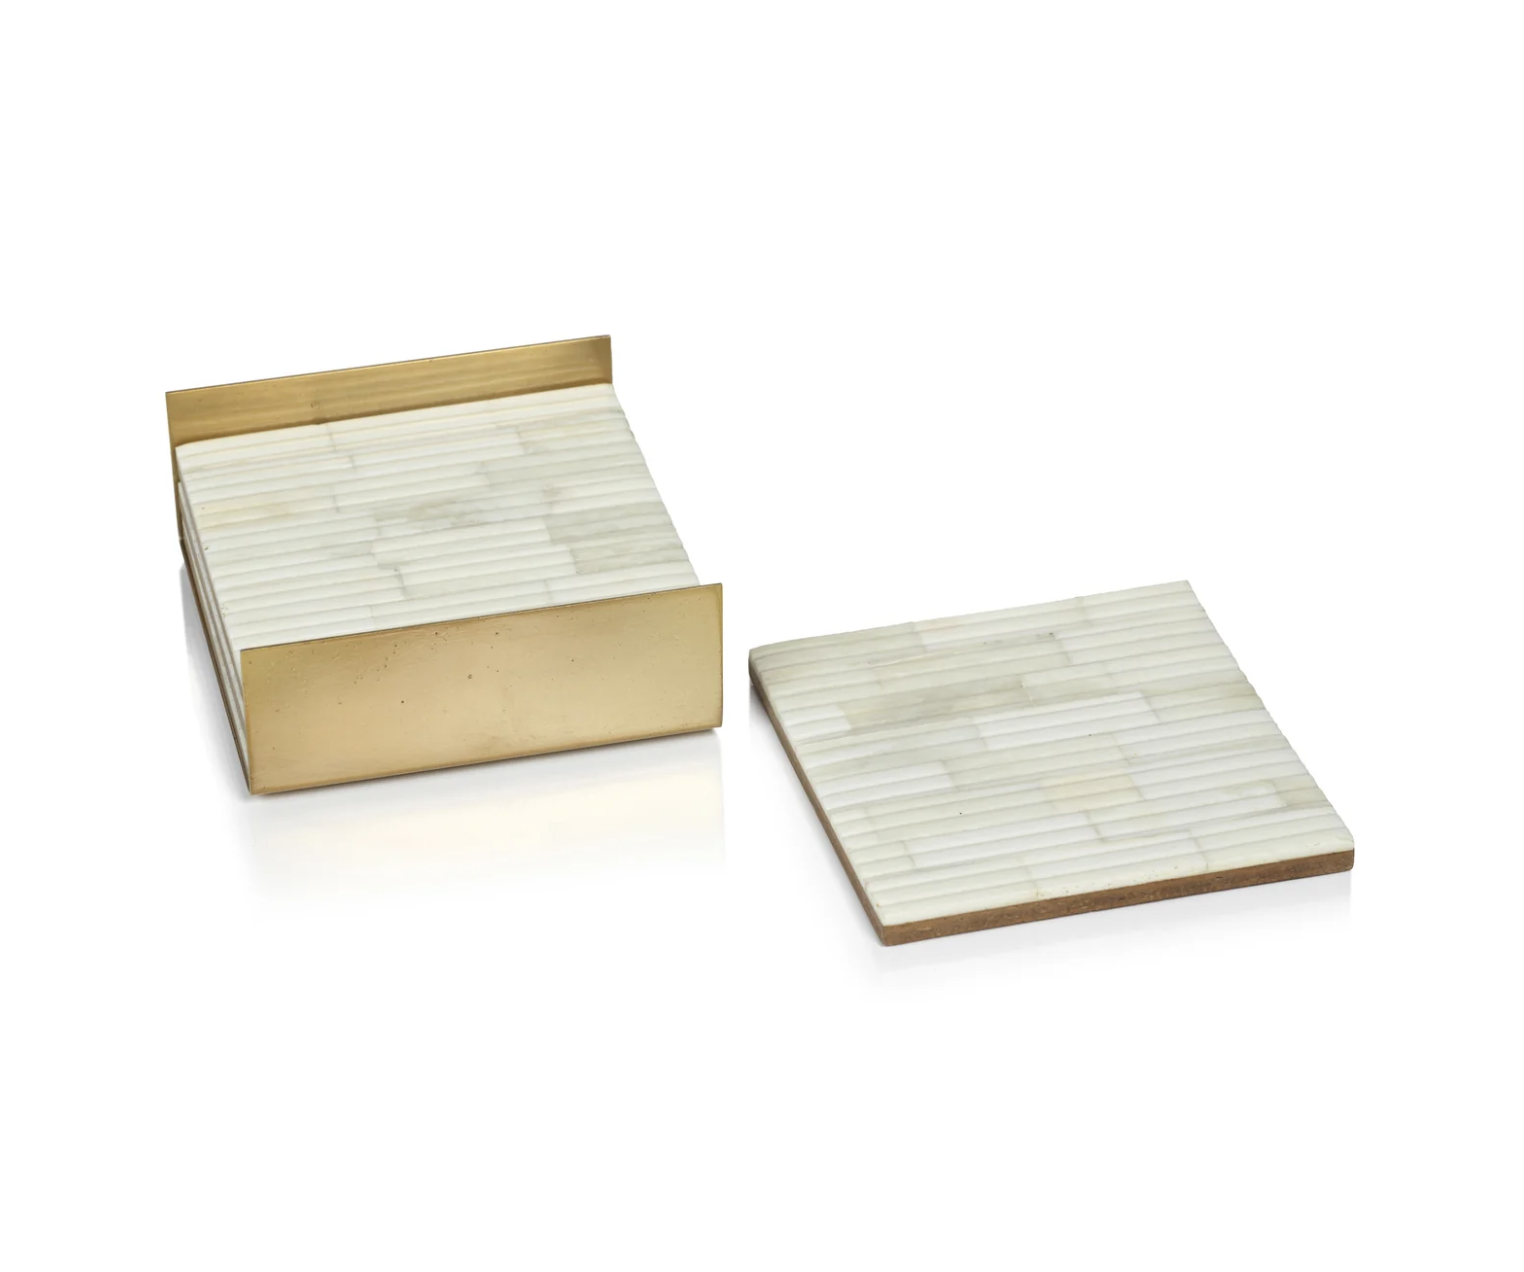 ZODAX Ribbed Bone Coasters - Set of 4 in Metal Tray - White